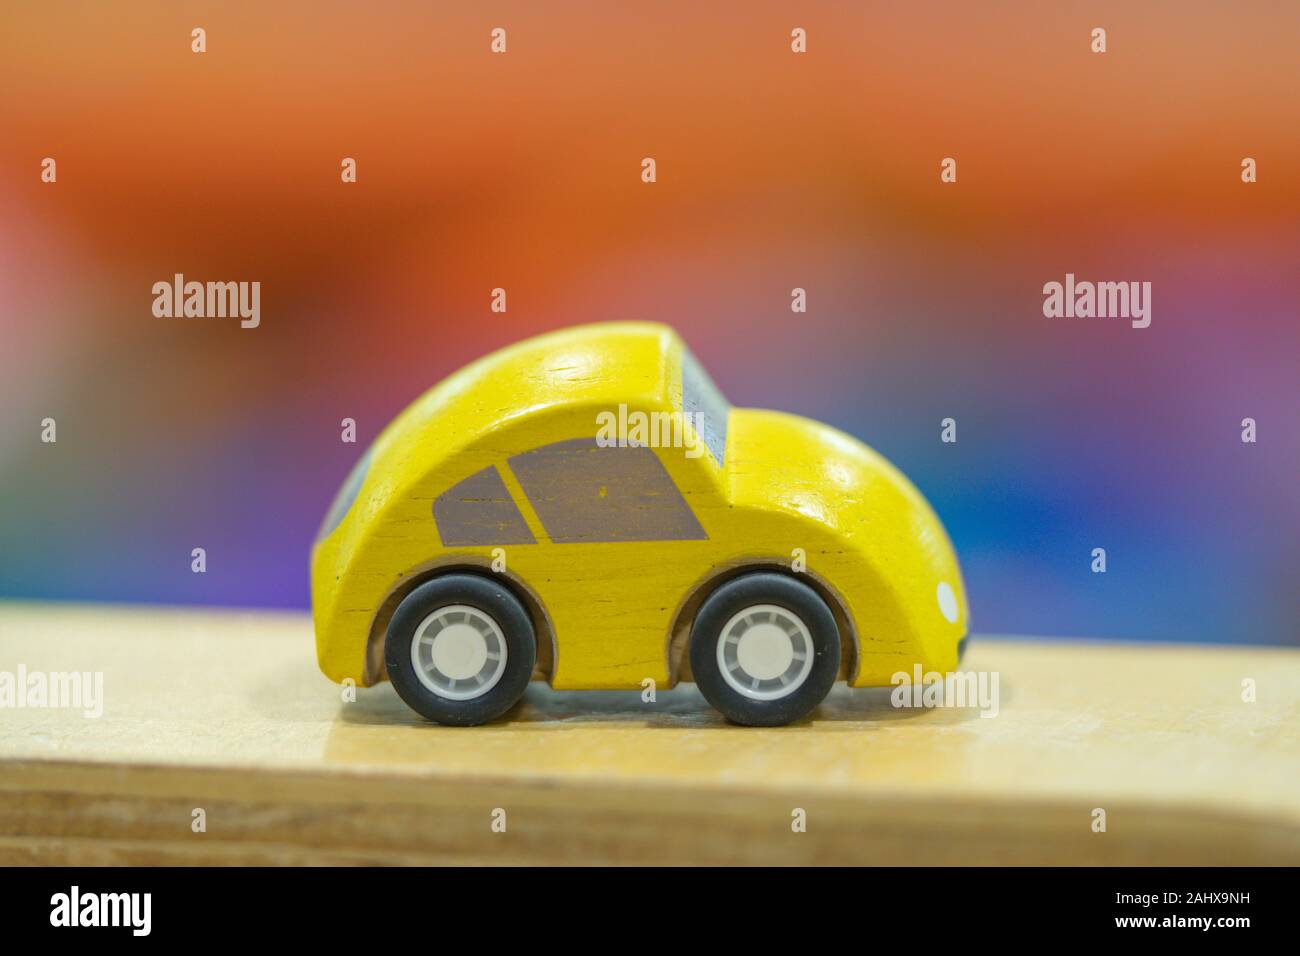 yellow car model on road, cars for kids Play set Educational toys for preschool indoor playground (selective focused) Stock Photo